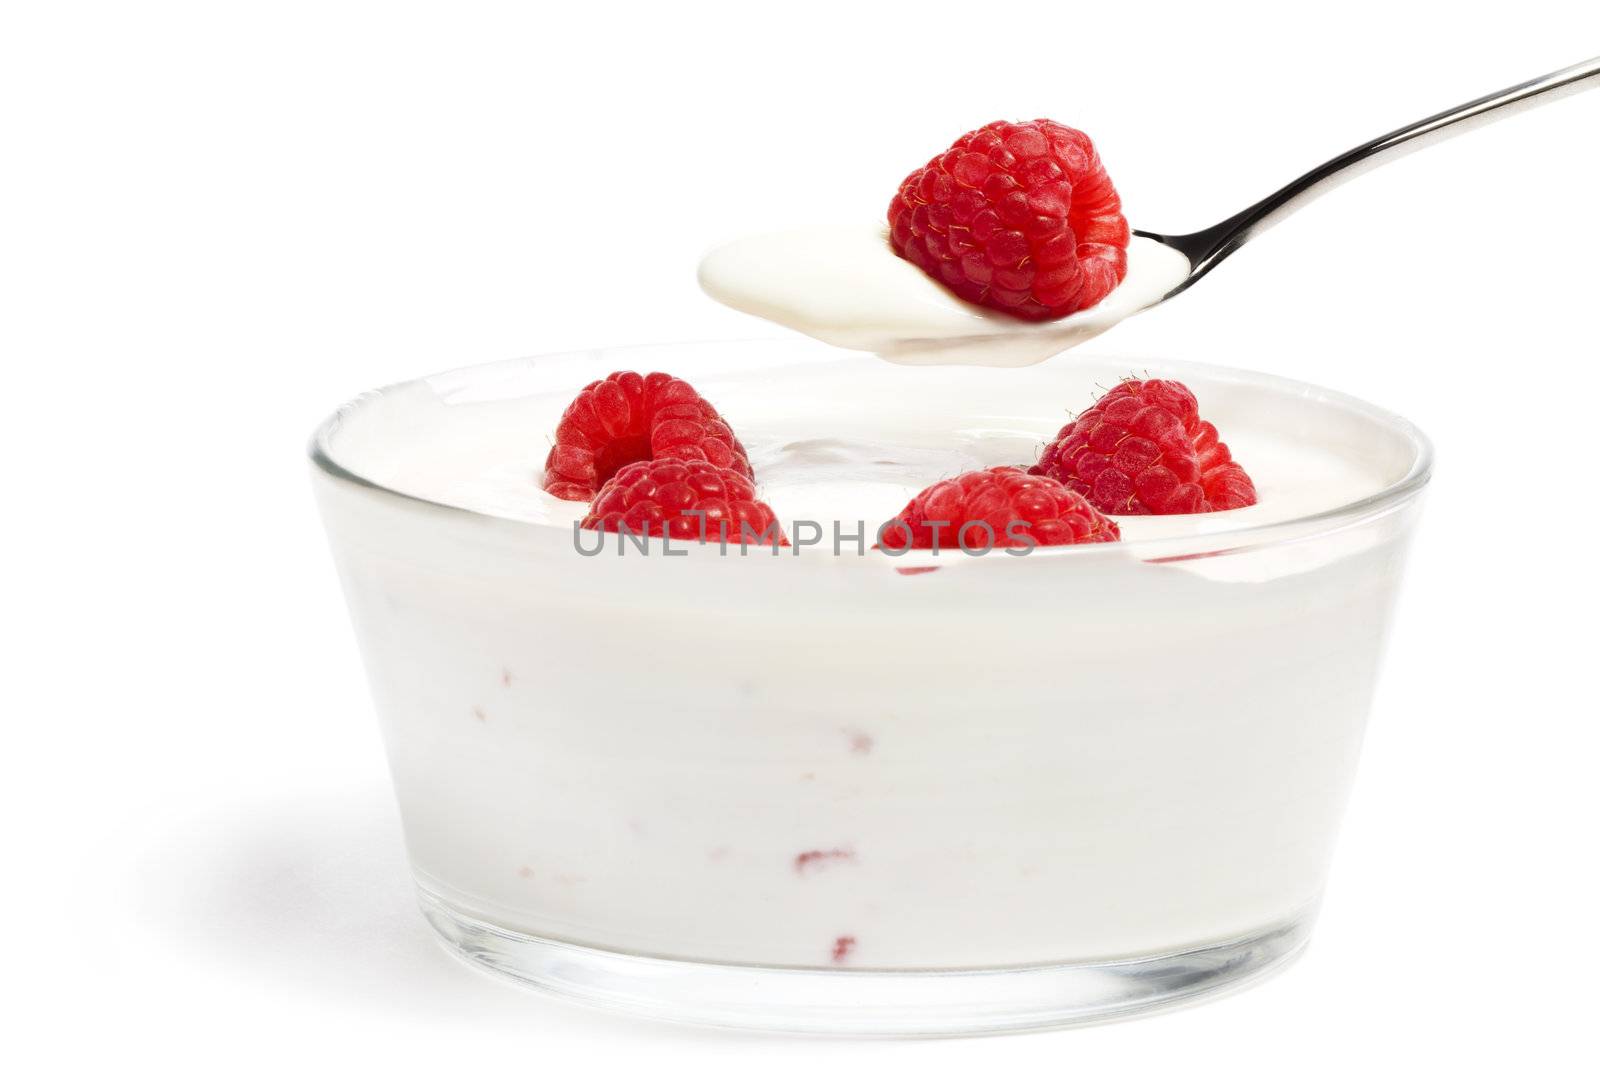 raspberry on a spoon over a dessert in a bowl with raspberries on white background